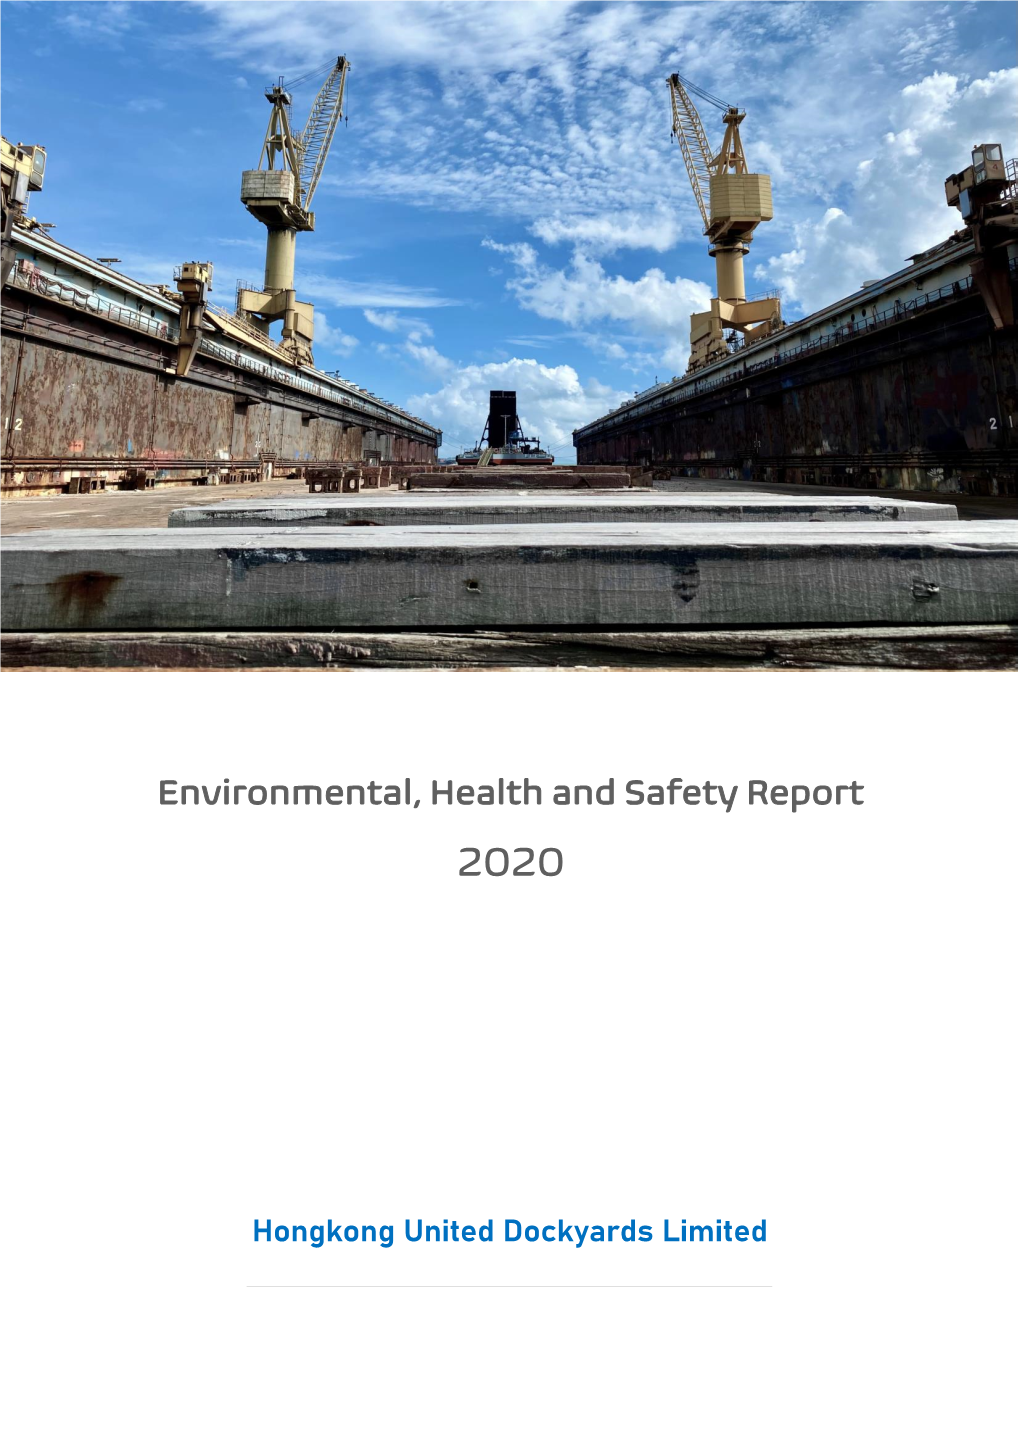 Environmental, Health and Safety Report 2020